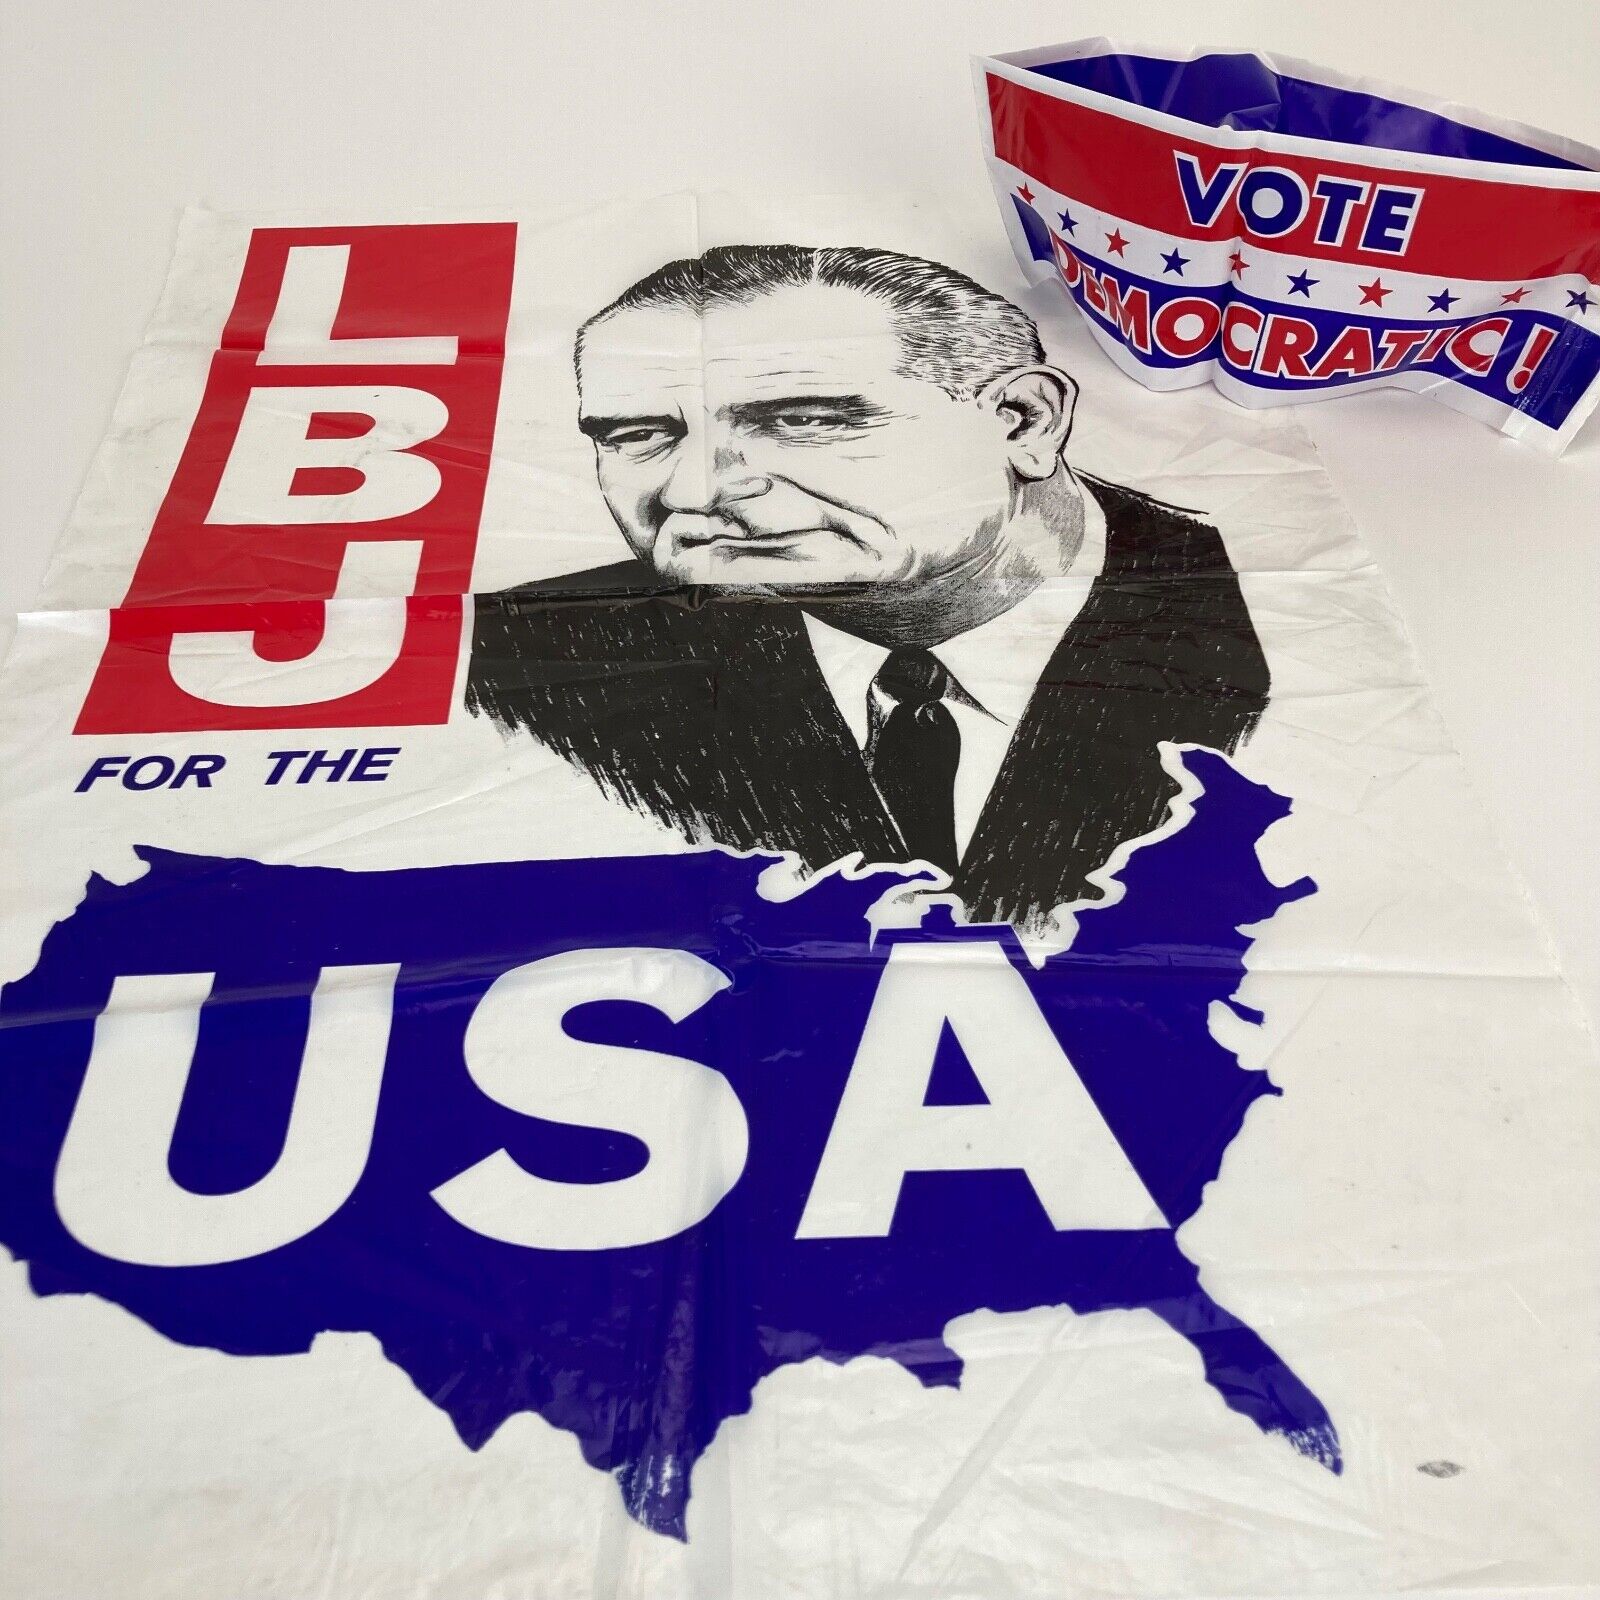 1964 Lyndon Johnson Plastic Presidential Campaign Poster 24x17 and Demo-Cap Hat